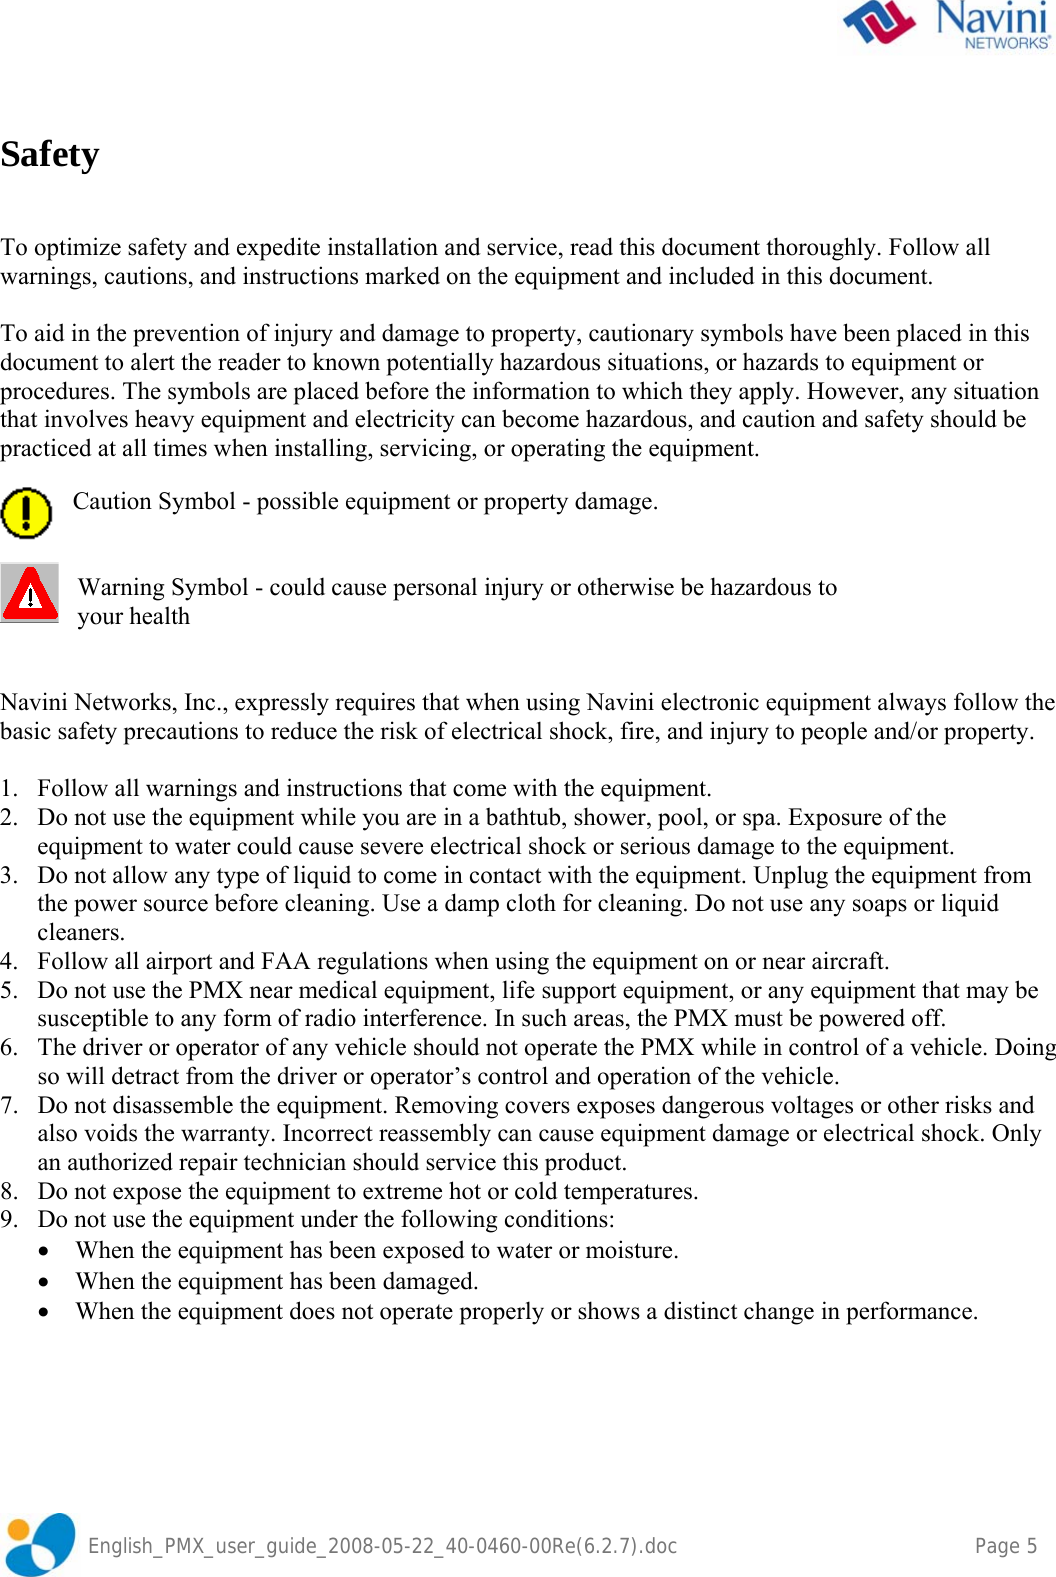    English_PMX_user_guide_2008-05-22_40-0460-00Re(6.2.7).doc    Page 5  Safety   To optimize safety and expedite installation and service, read this document thoroughly. Follow all warnings, cautions, and instructions marked on the equipment and included in this document.  To aid in the prevention of injury and damage to property, cautionary symbols have been placed in this document to alert the reader to known potentially hazardous situations, or hazards to equipment or procedures. The symbols are placed before the information to which they apply. However, any situation that involves heavy equipment and electricity can become hazardous, and caution and safety should be practiced at all times when installing, servicing, or operating the equipment.  Caution Symbol - possible equipment or property damage.   Warning Symbol - could cause personal injury or otherwise be hazardous to  your health   Navini Networks, Inc., expressly requires that when using Navini electronic equipment always follow the basic safety precautions to reduce the risk of electrical shock, fire, and injury to people and/or property.  1. Follow all warnings and instructions that come with the equipment. 2. Do not use the equipment while you are in a bathtub, shower, pool, or spa. Exposure of the equipment to water could cause severe electrical shock or serious damage to the equipment. 3. Do not allow any type of liquid to come in contact with the equipment. Unplug the equipment from the power source before cleaning. Use a damp cloth for cleaning. Do not use any soaps or liquid cleaners. 4. Follow all airport and FAA regulations when using the equipment on or near aircraft. 5. Do not use the PMX near medical equipment, life support equipment, or any equipment that may be susceptible to any form of radio interference. In such areas, the PMX must be powered off. 6. The driver or operator of any vehicle should not operate the PMX while in control of a vehicle. Doing so will detract from the driver or operator’s control and operation of the vehicle. 7. Do not disassemble the equipment. Removing covers exposes dangerous voltages or other risks and also voids the warranty. Incorrect reassembly can cause equipment damage or electrical shock. Only an authorized repair technician should service this product. 8. Do not expose the equipment to extreme hot or cold temperatures. 9. Do not use the equipment under the following conditions: • When the equipment has been exposed to water or moisture. • When the equipment has been damaged. • When the equipment does not operate properly or shows a distinct change in performance.  